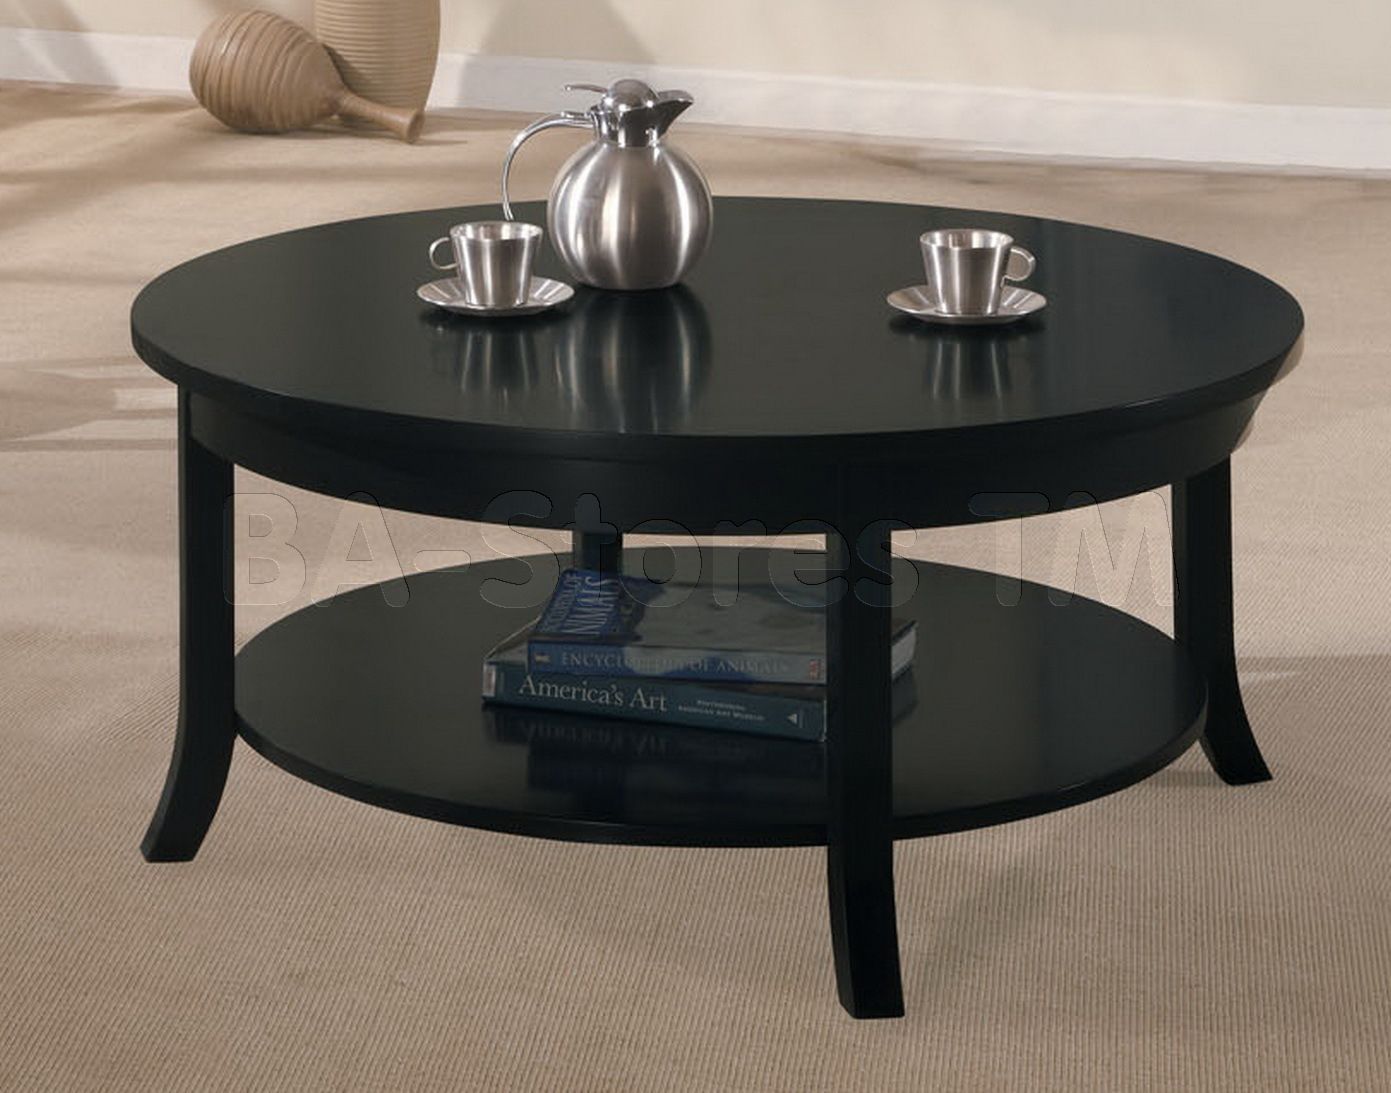 Bring A Touch Of Elegance To Your Home With A Black Circle Coffee Table Inside Full Black Round Coffee Tables (View 5 of 20)